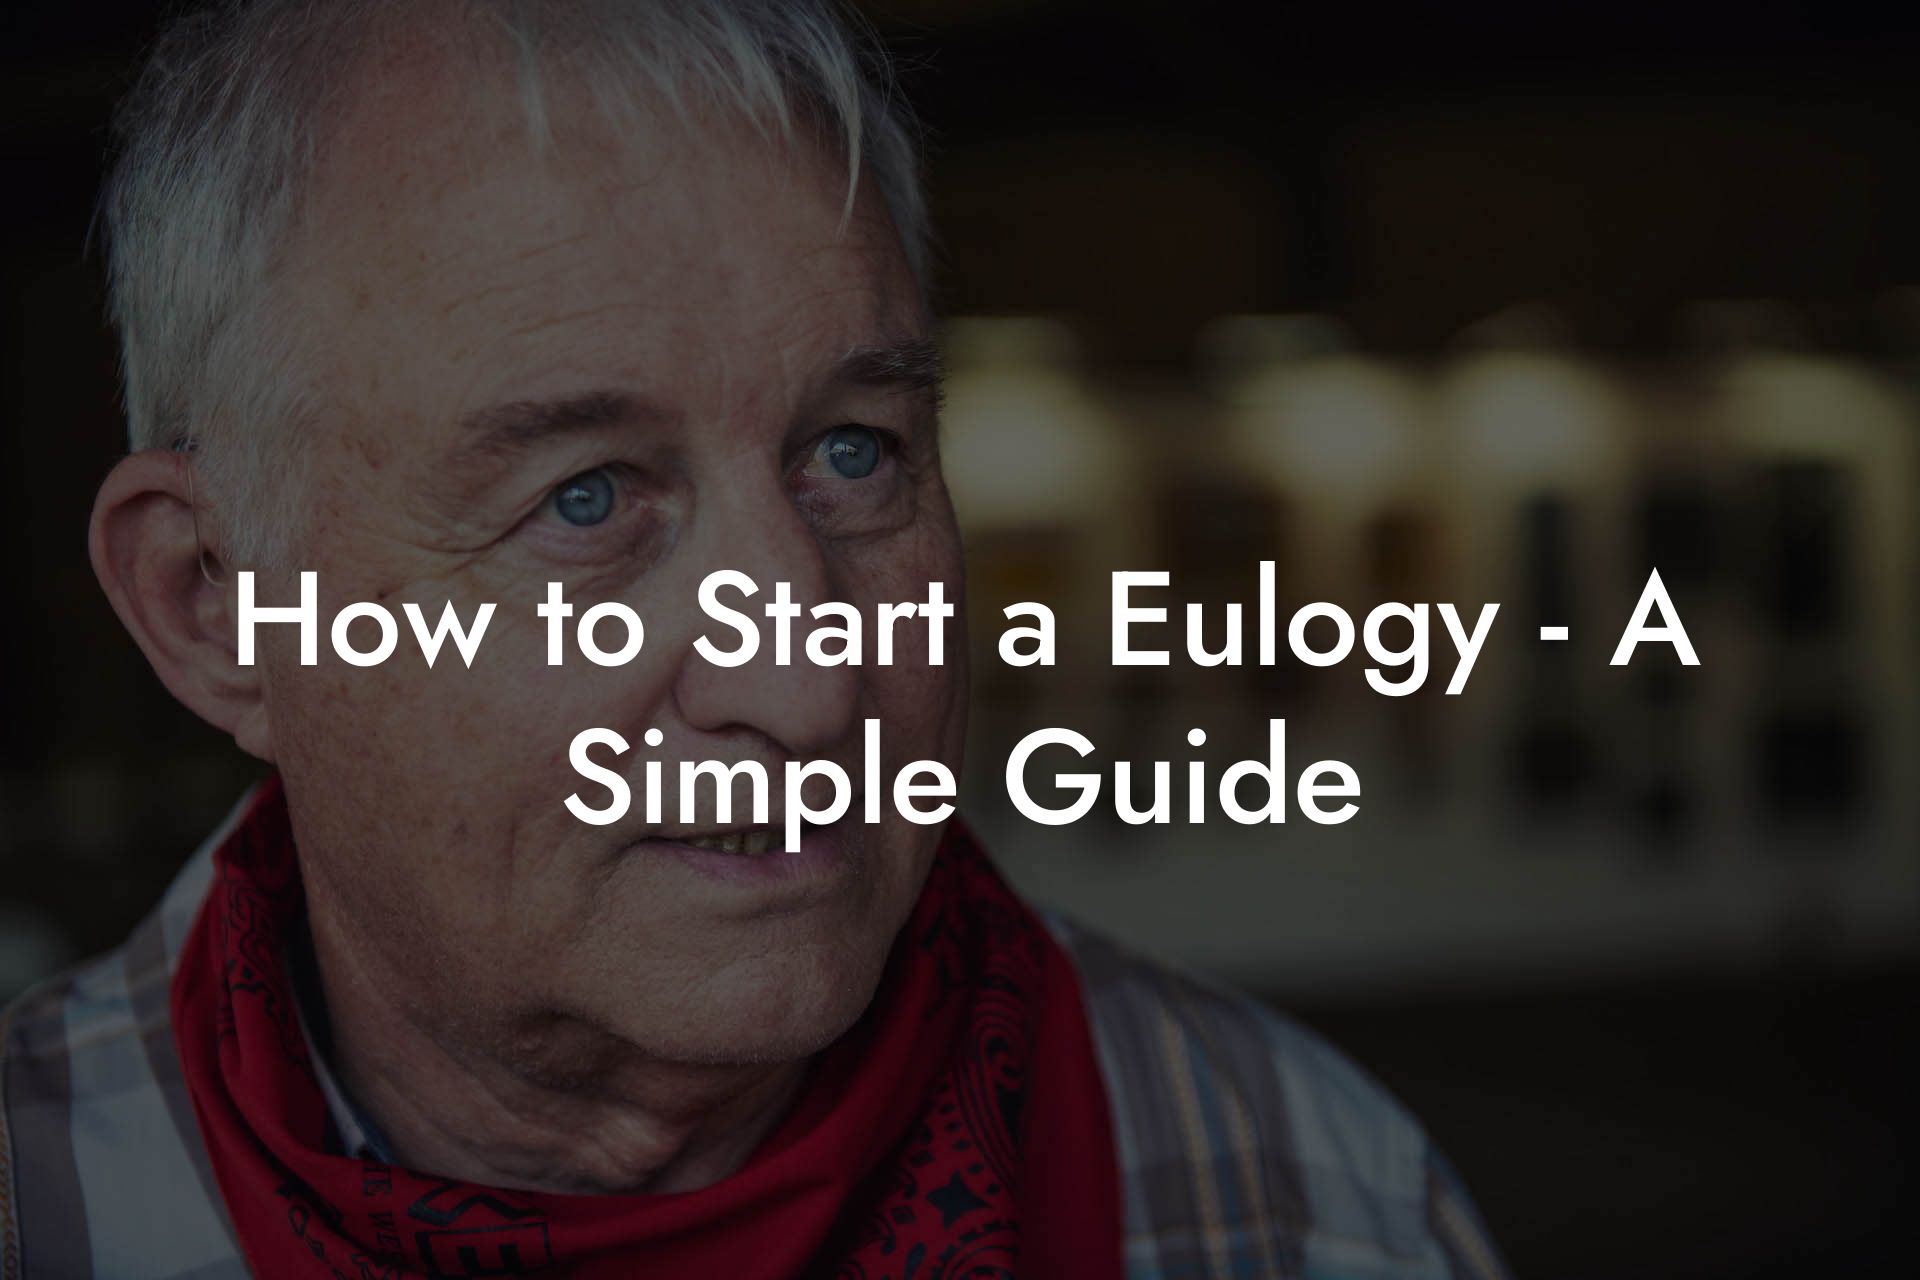 How to Start a Eulogy - A Simple Guide